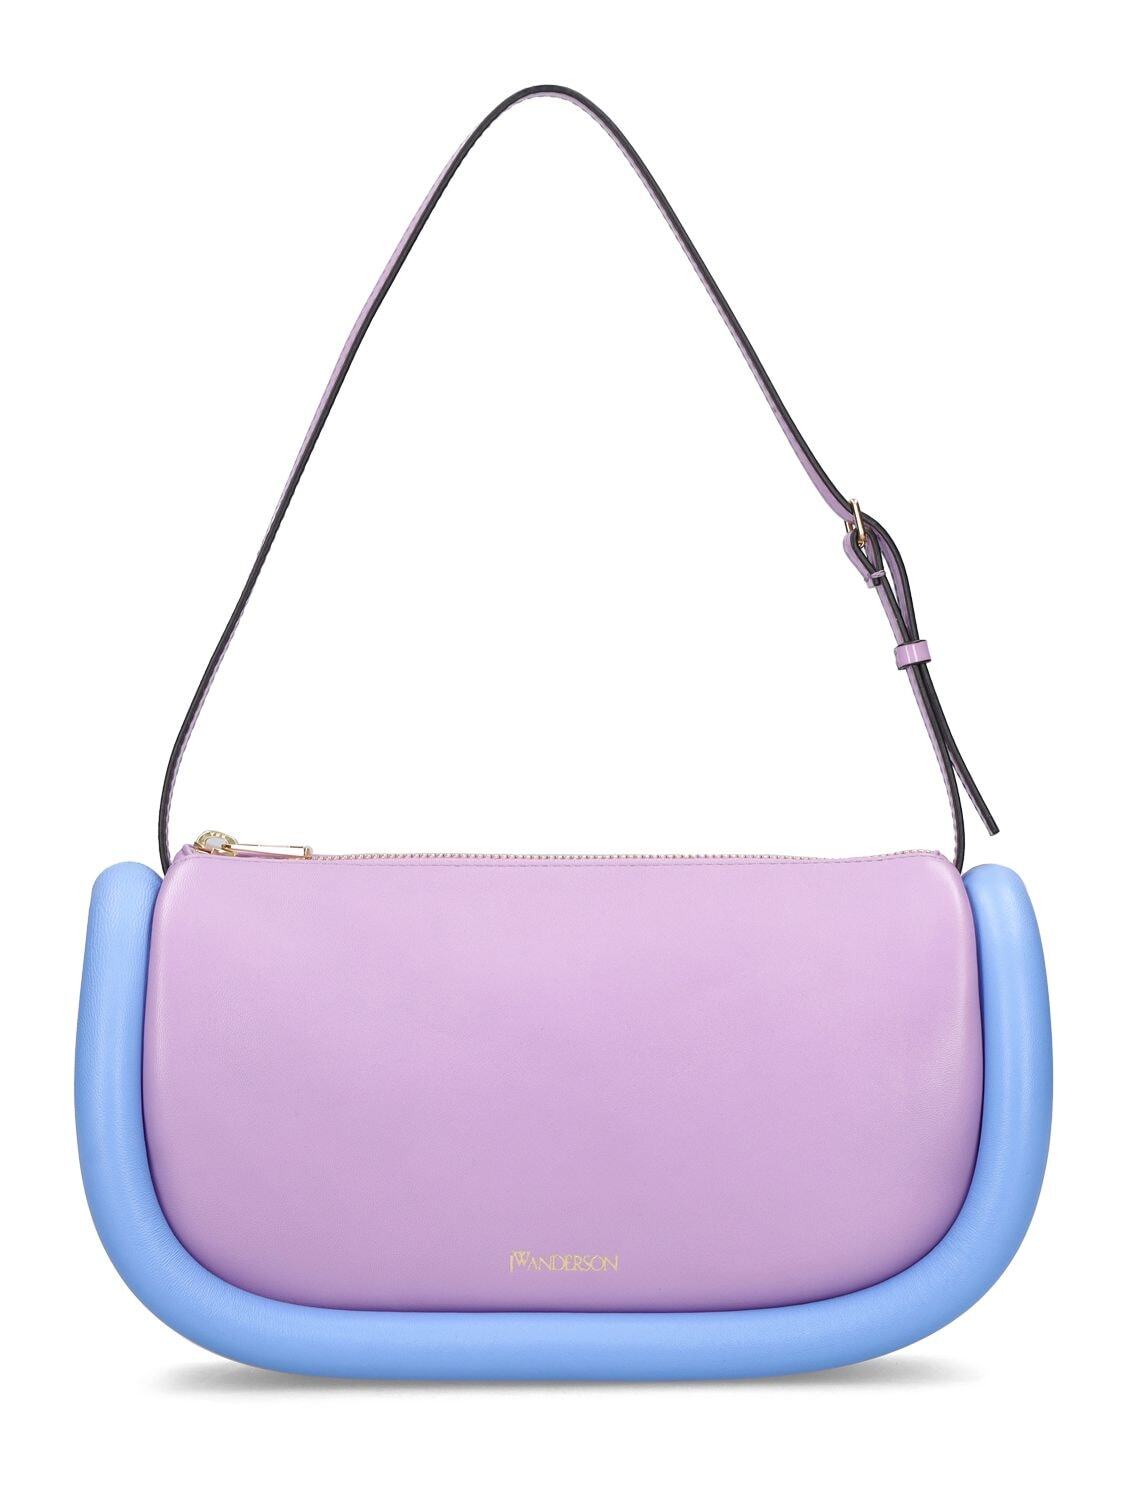 JW ANDERSON The Bumper-15 Leather Shoulder Bag in blue / lilac